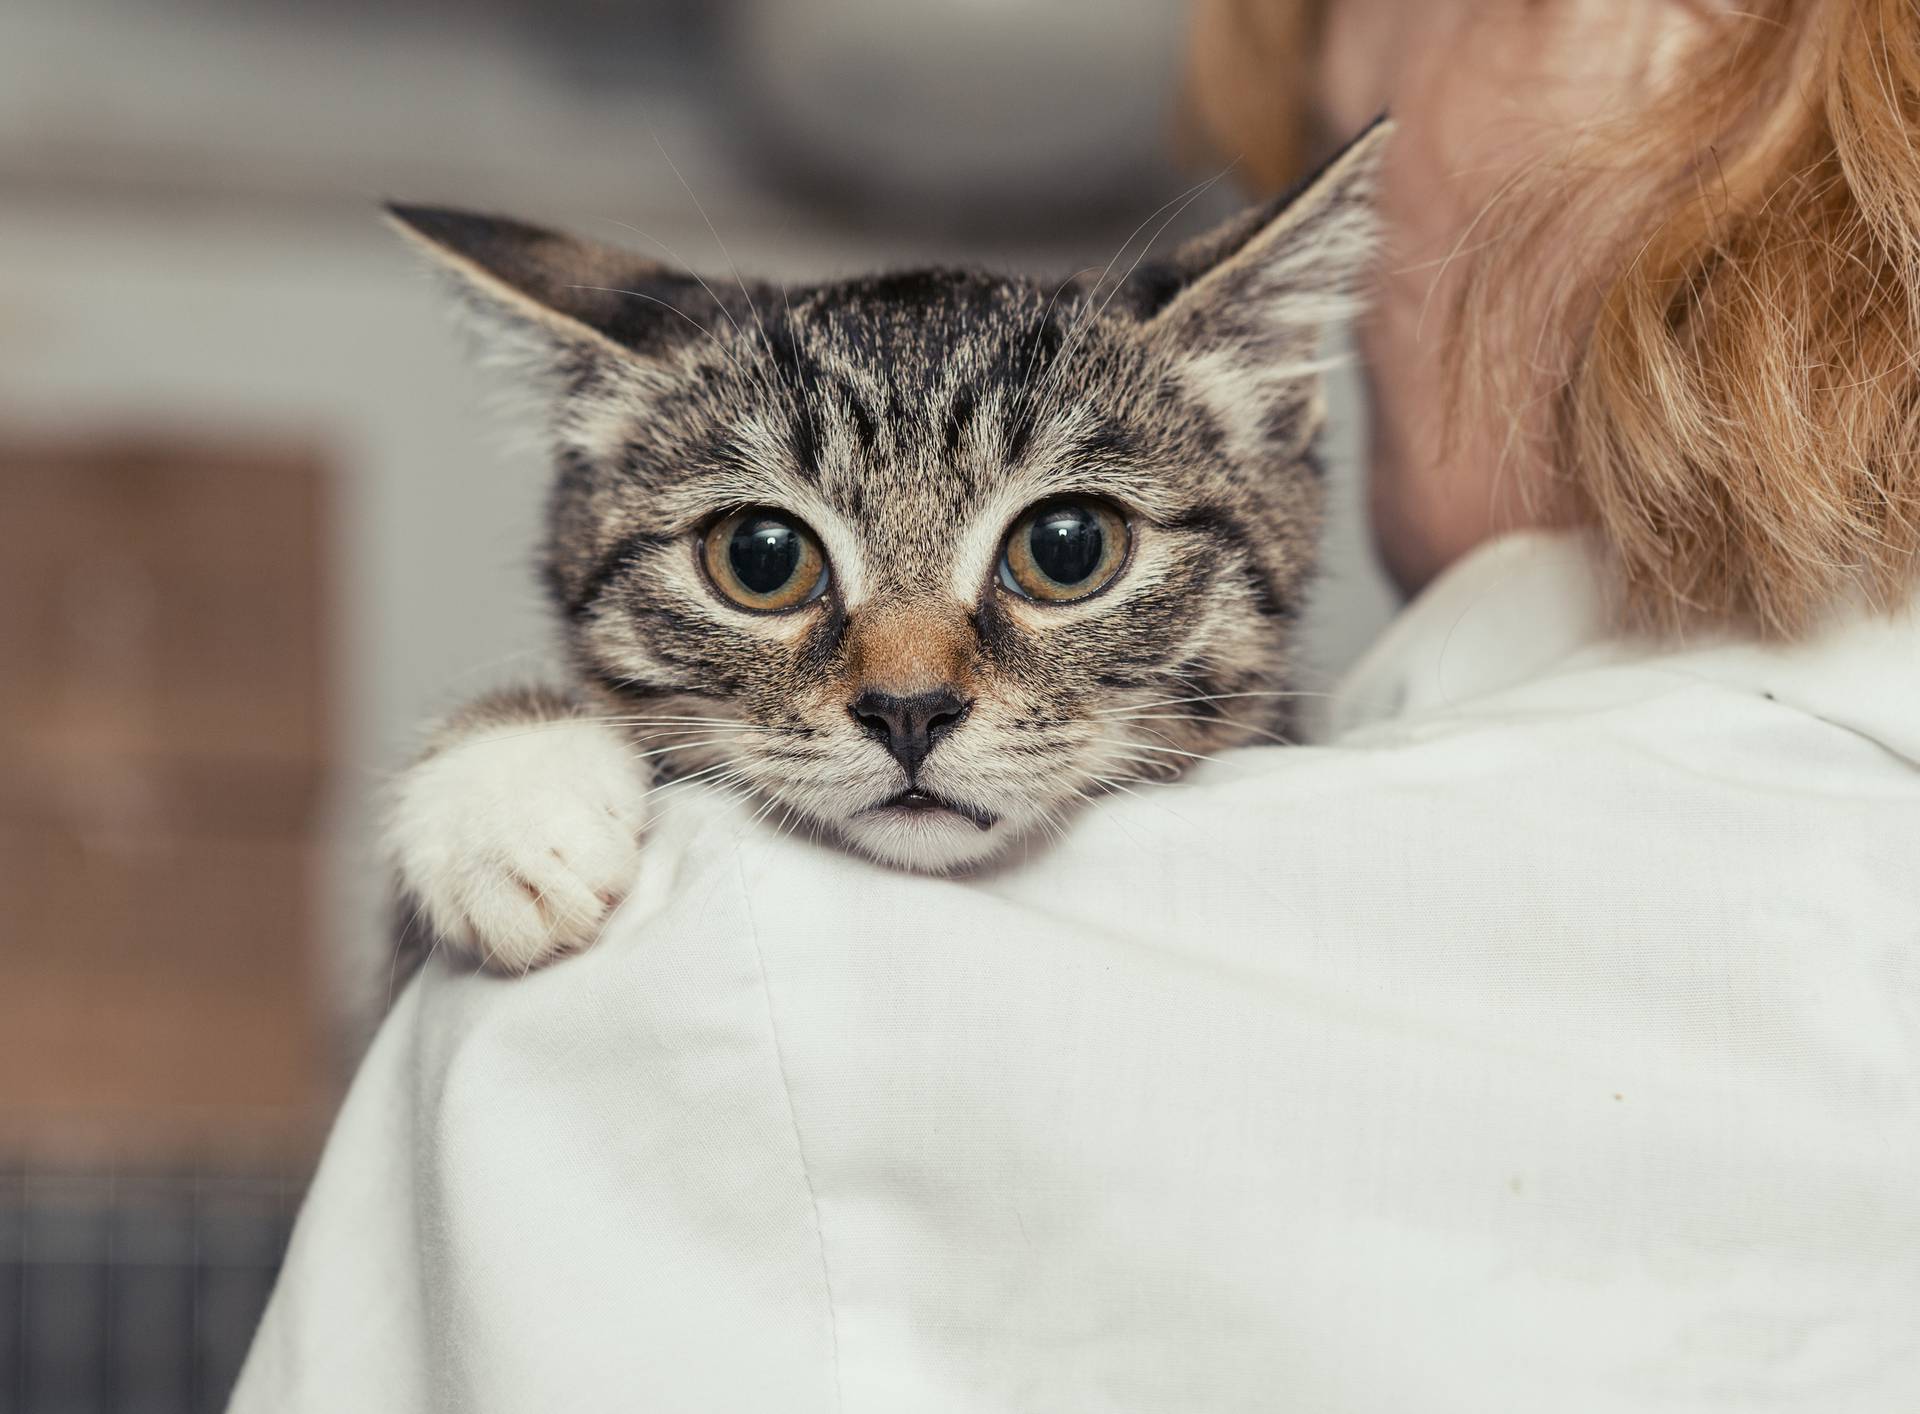 Small kitten into the hands of the physician